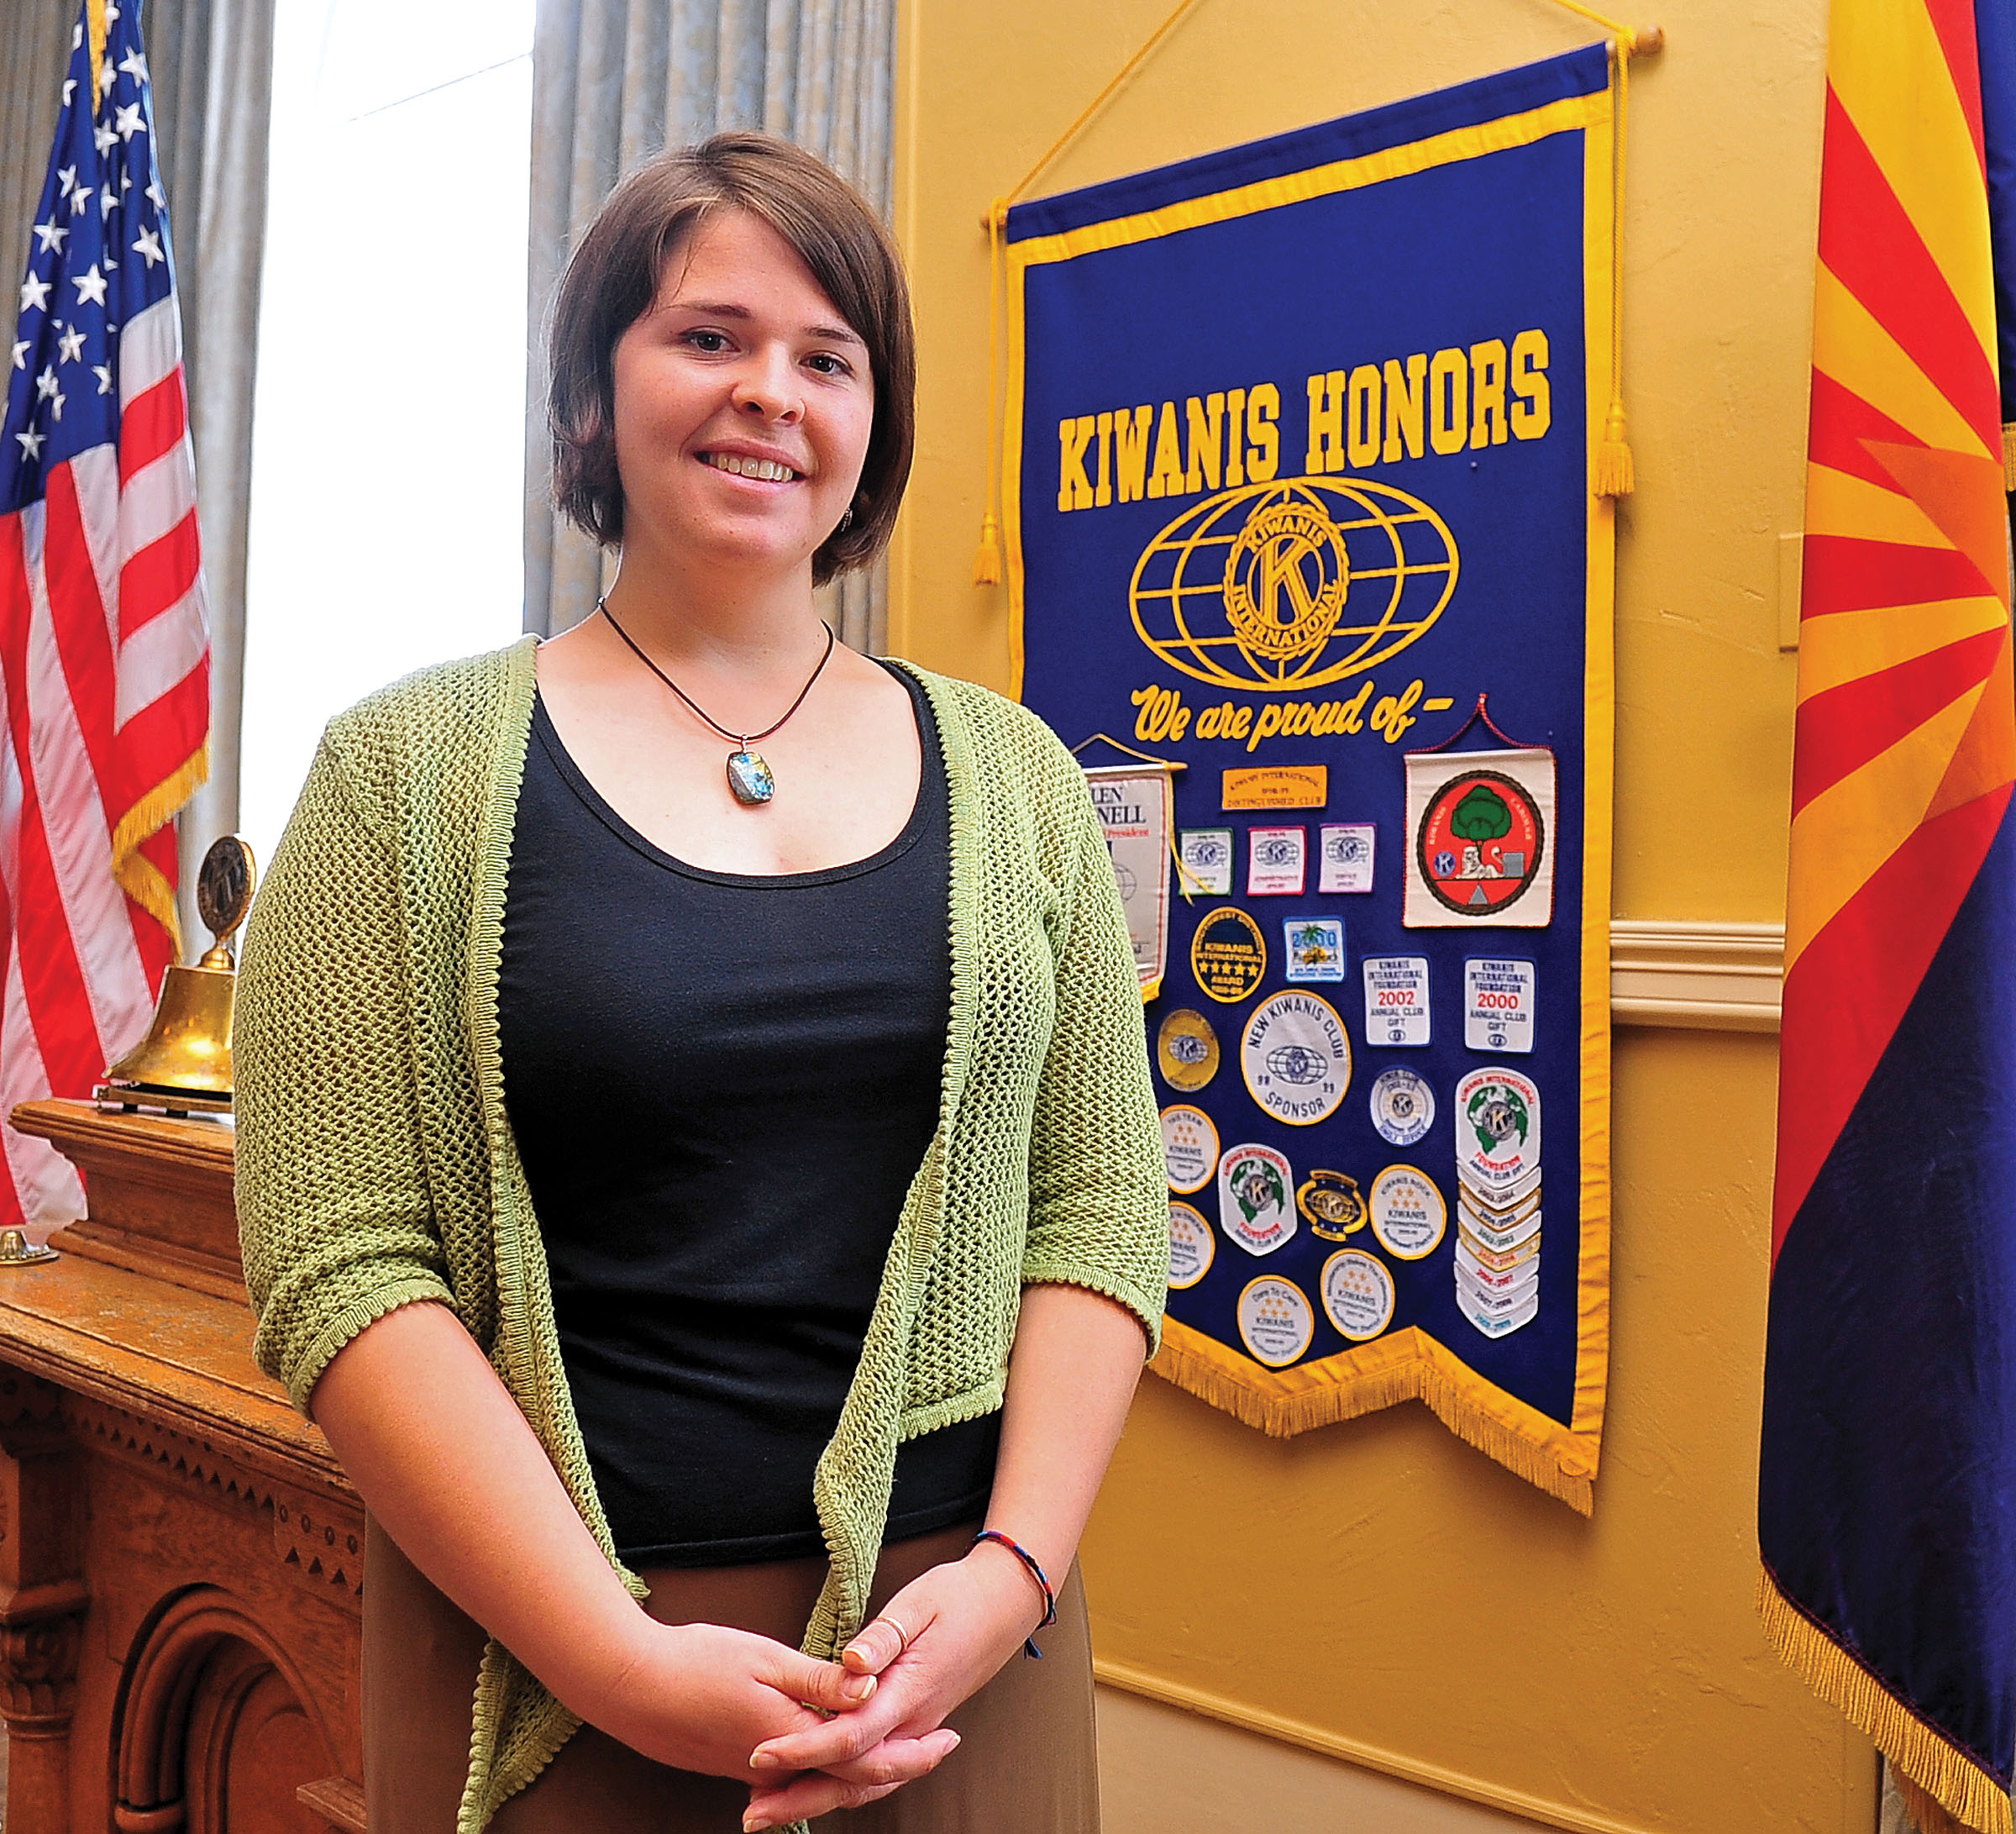 Kayla Mueller after speaking to a group in Prescott, Ariz. on May 30, 2013.